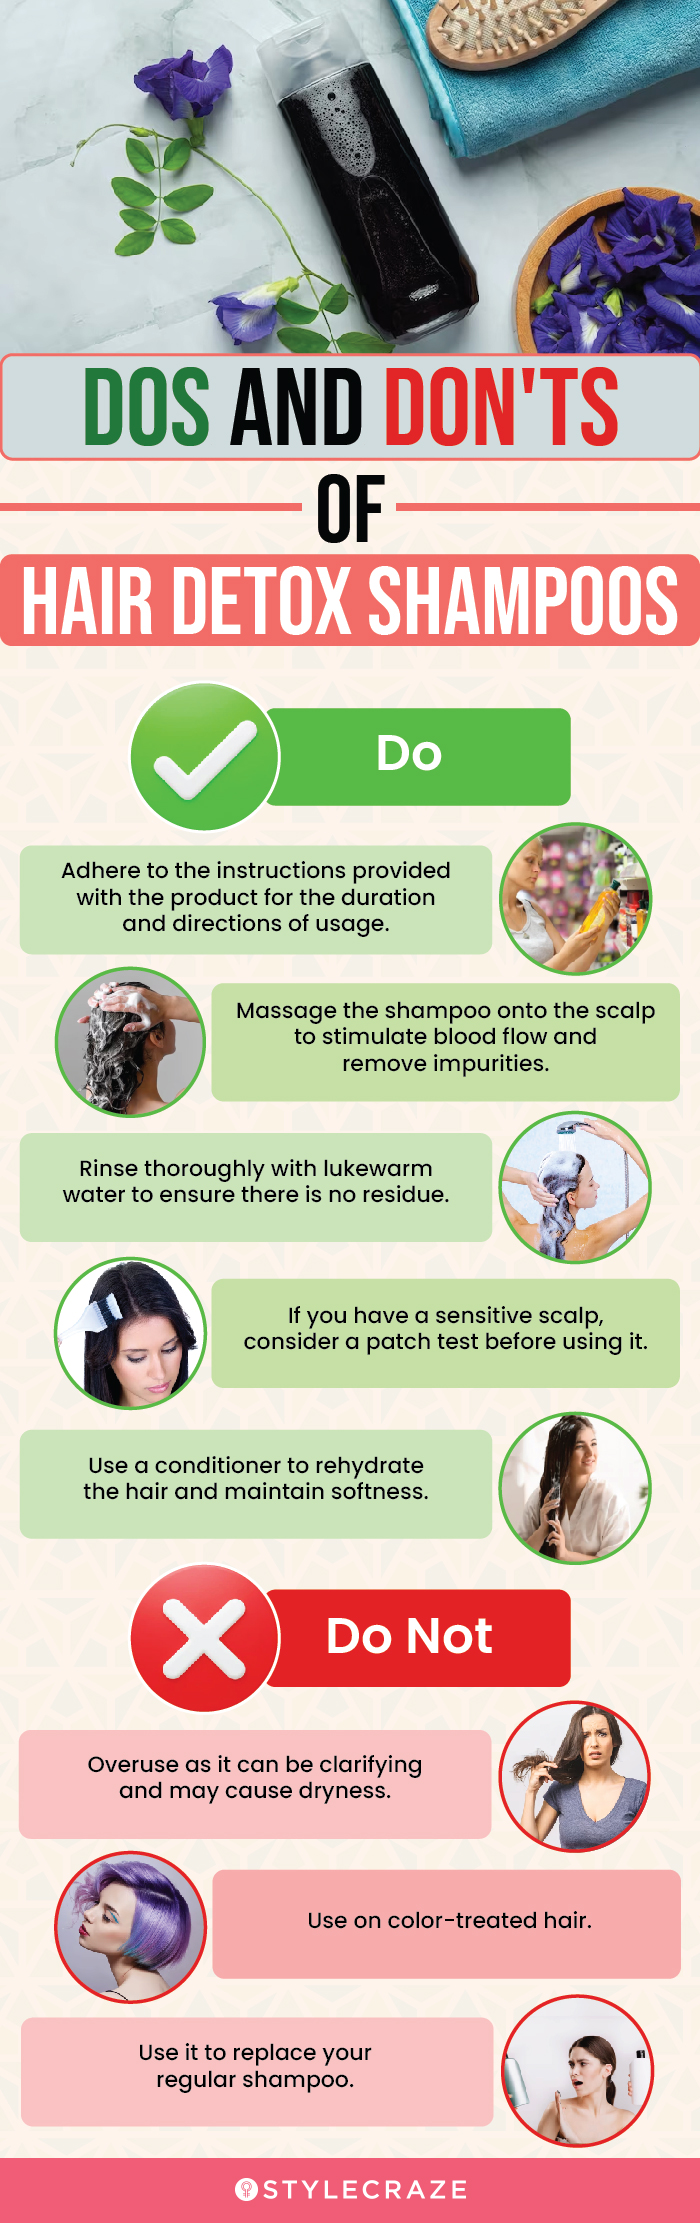 Dos And Don'ts Of Hair Detox Shampoos (infographic)